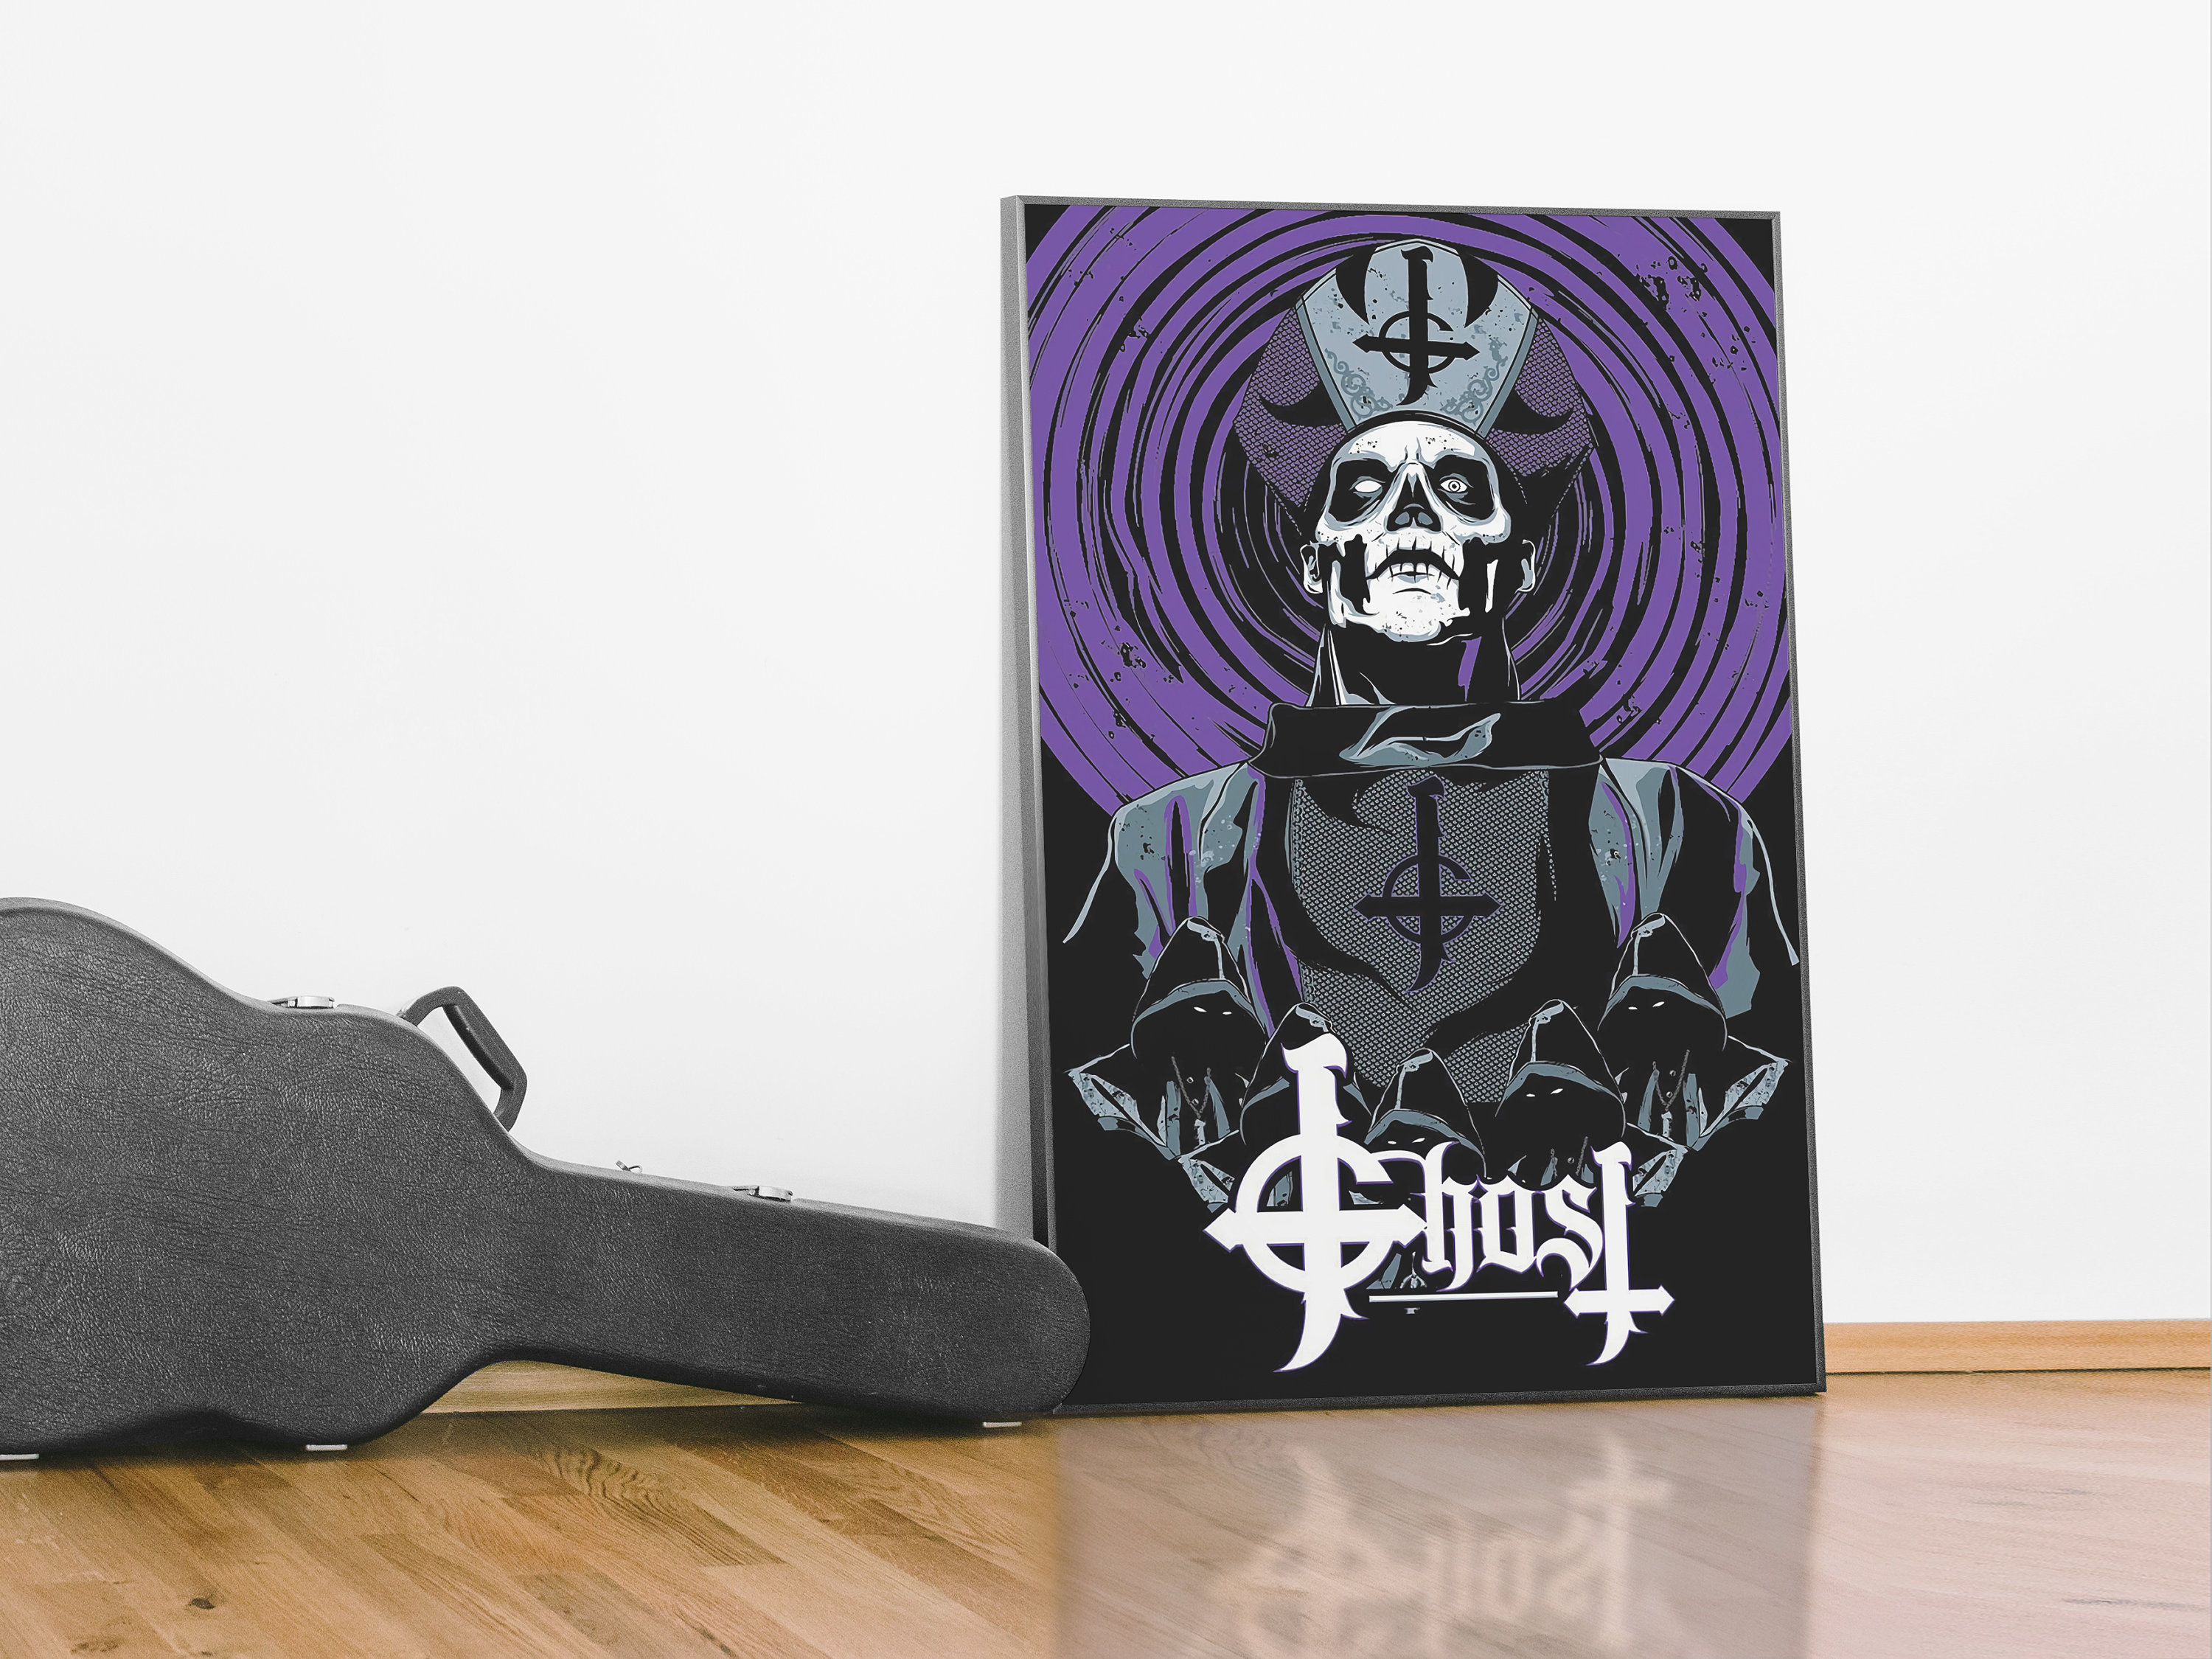 Discover Ghost Poster | Ghost Music Poster | Ghost Vintage Poster | Vintage Music Poster | Ghost B.C. Poster | Metal Music Poster | Ghost Poster Gift